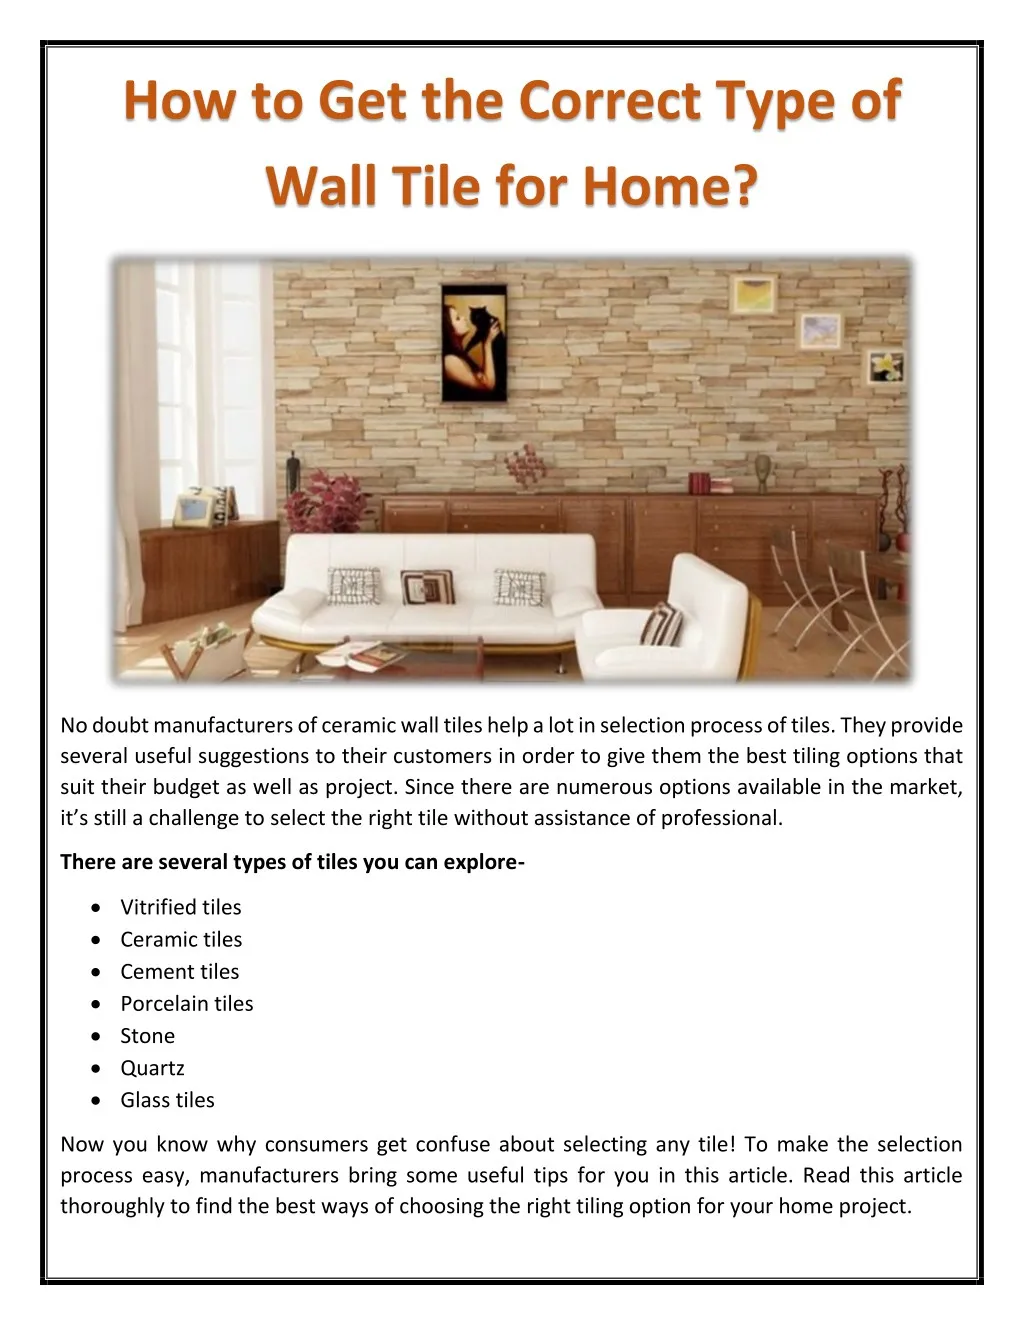 how to get the correct type of wall tile for home